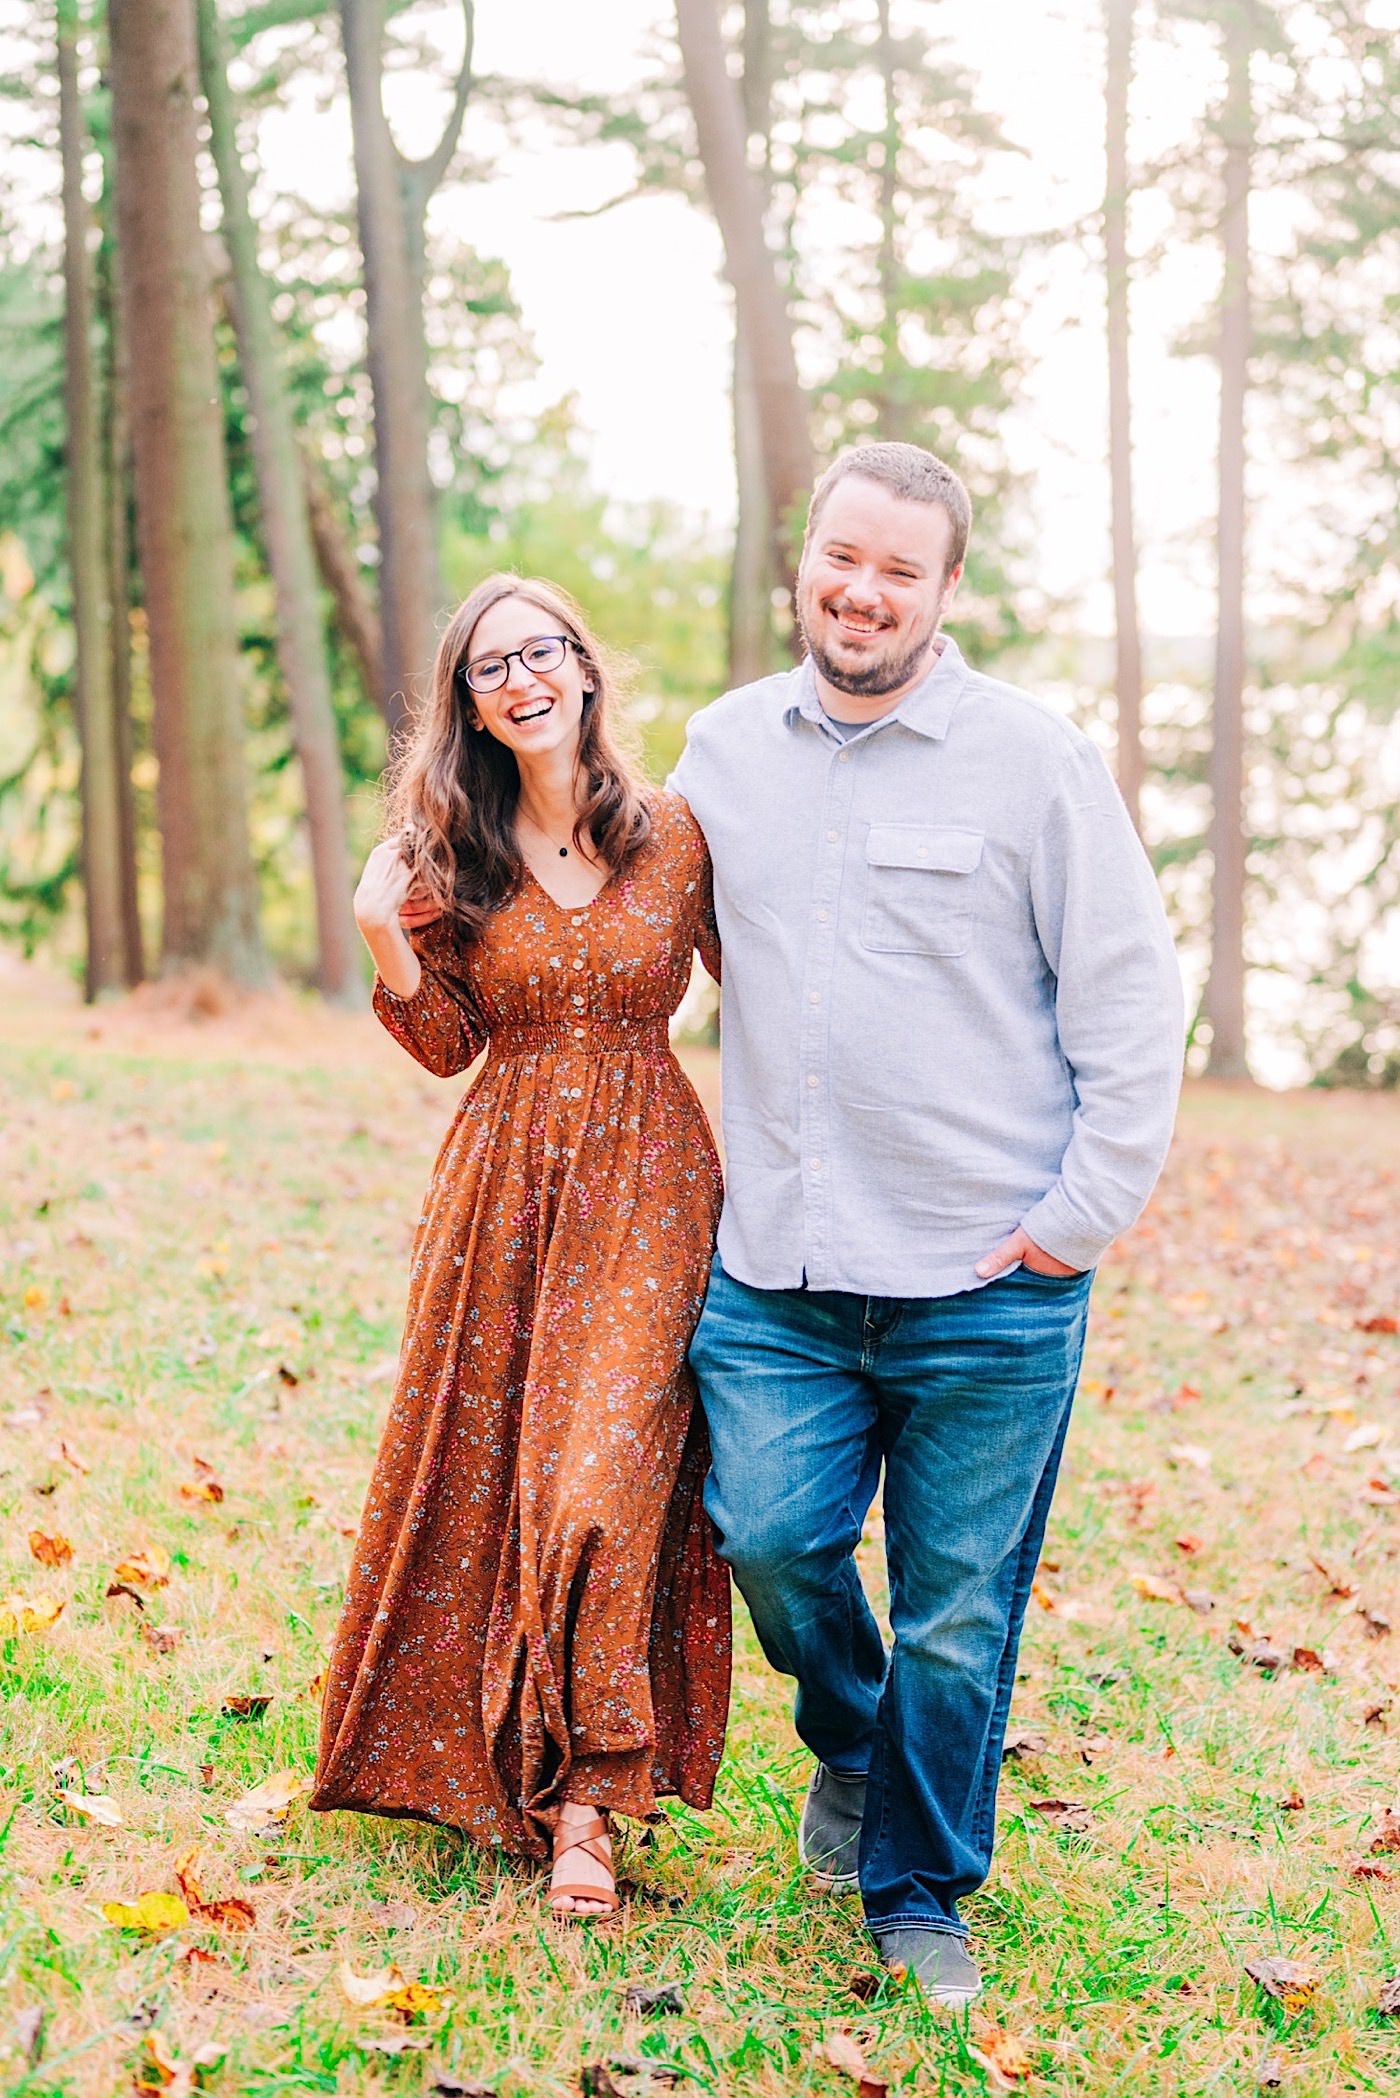 Southern Maryland Wedding Photographer, Fall engagement session ideas, Kyra Gustwick, Loch Raven Reservoir Engagement Session, Baltimore MD Photographer